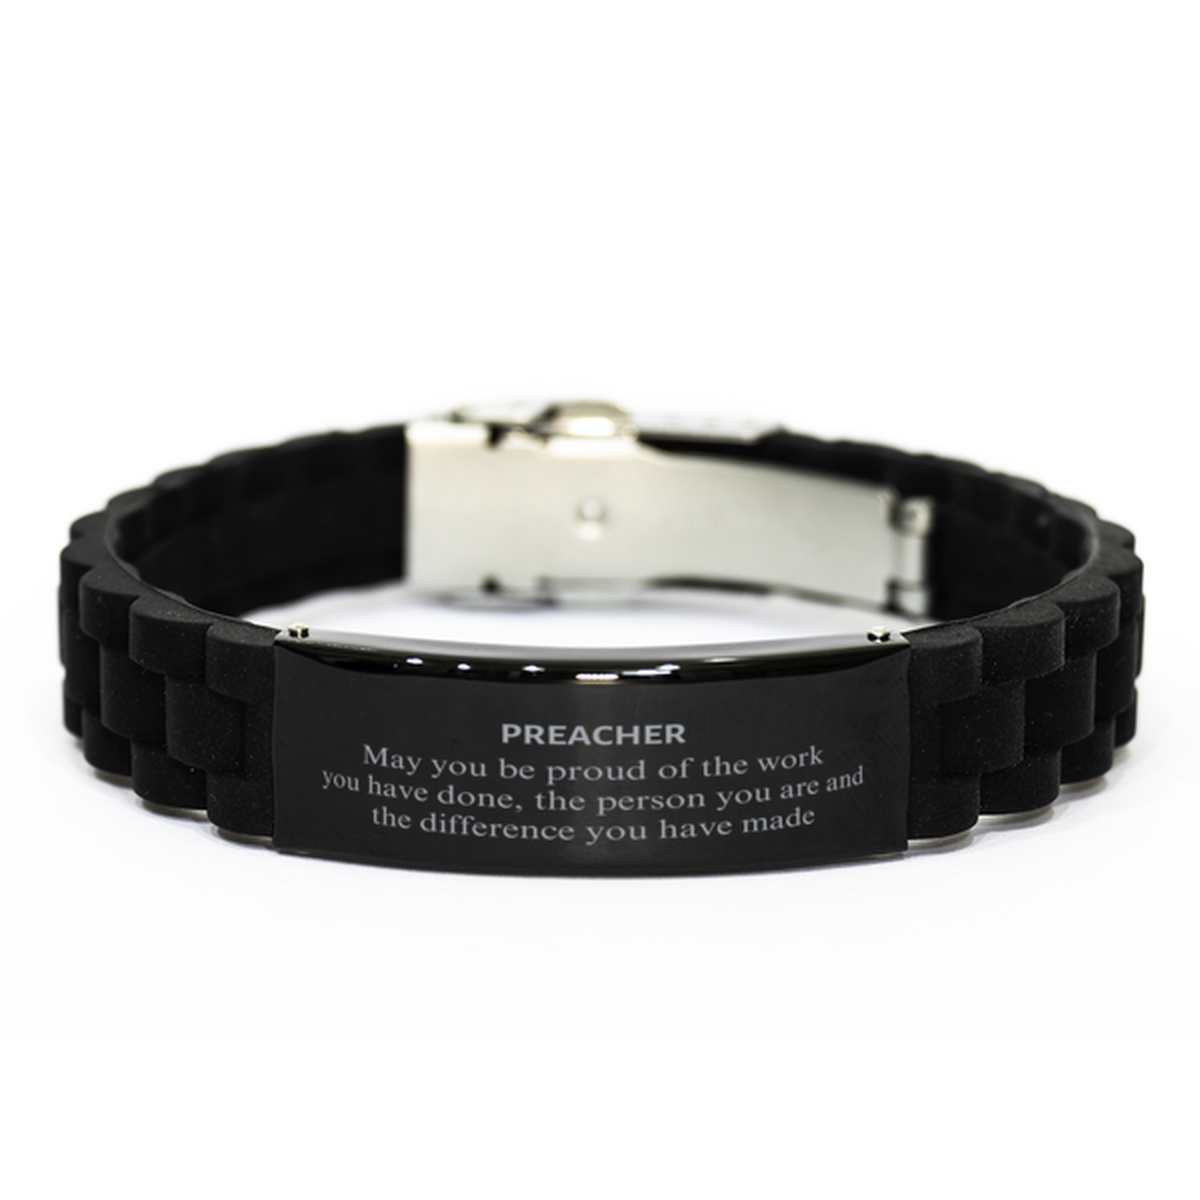 Preacher May you be proud of the work you have done, Retirement Preacher Black Glidelock Clasp Bracelet for Colleague Appreciation Gifts Amazing for Preacher